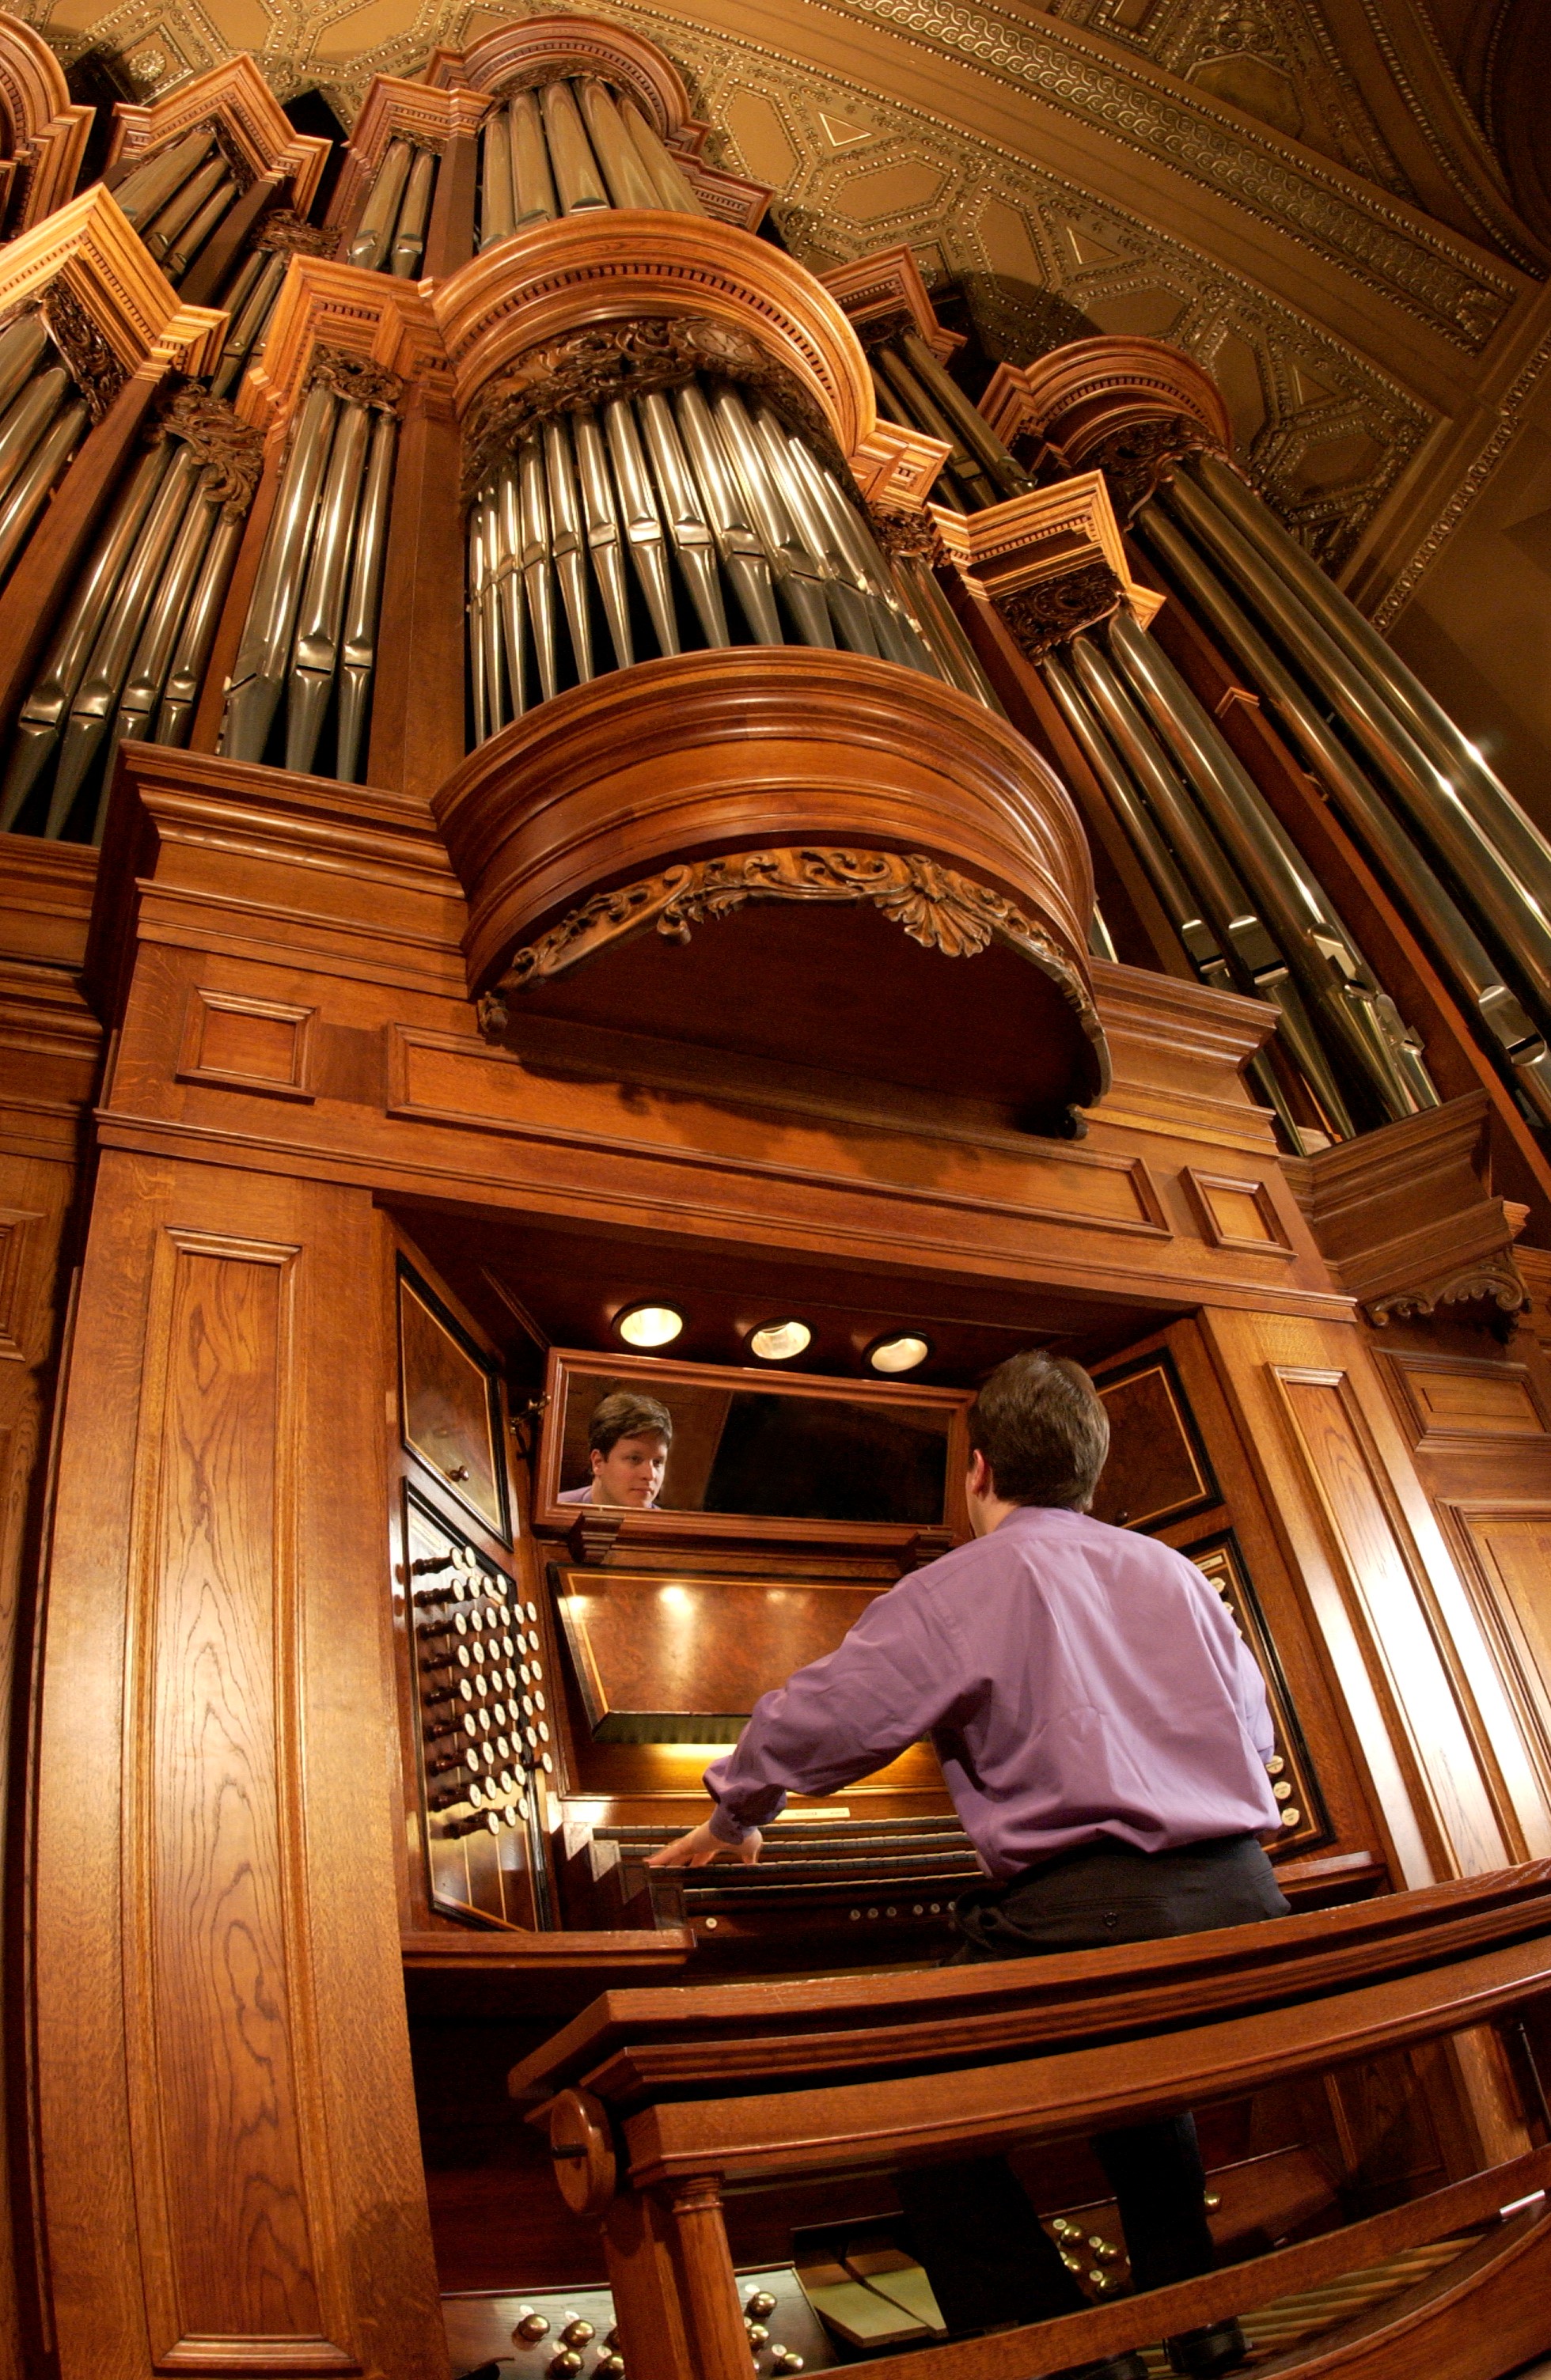 Paul Jacobs is pictured seated at the organ at St. Ignatius Loyola Church